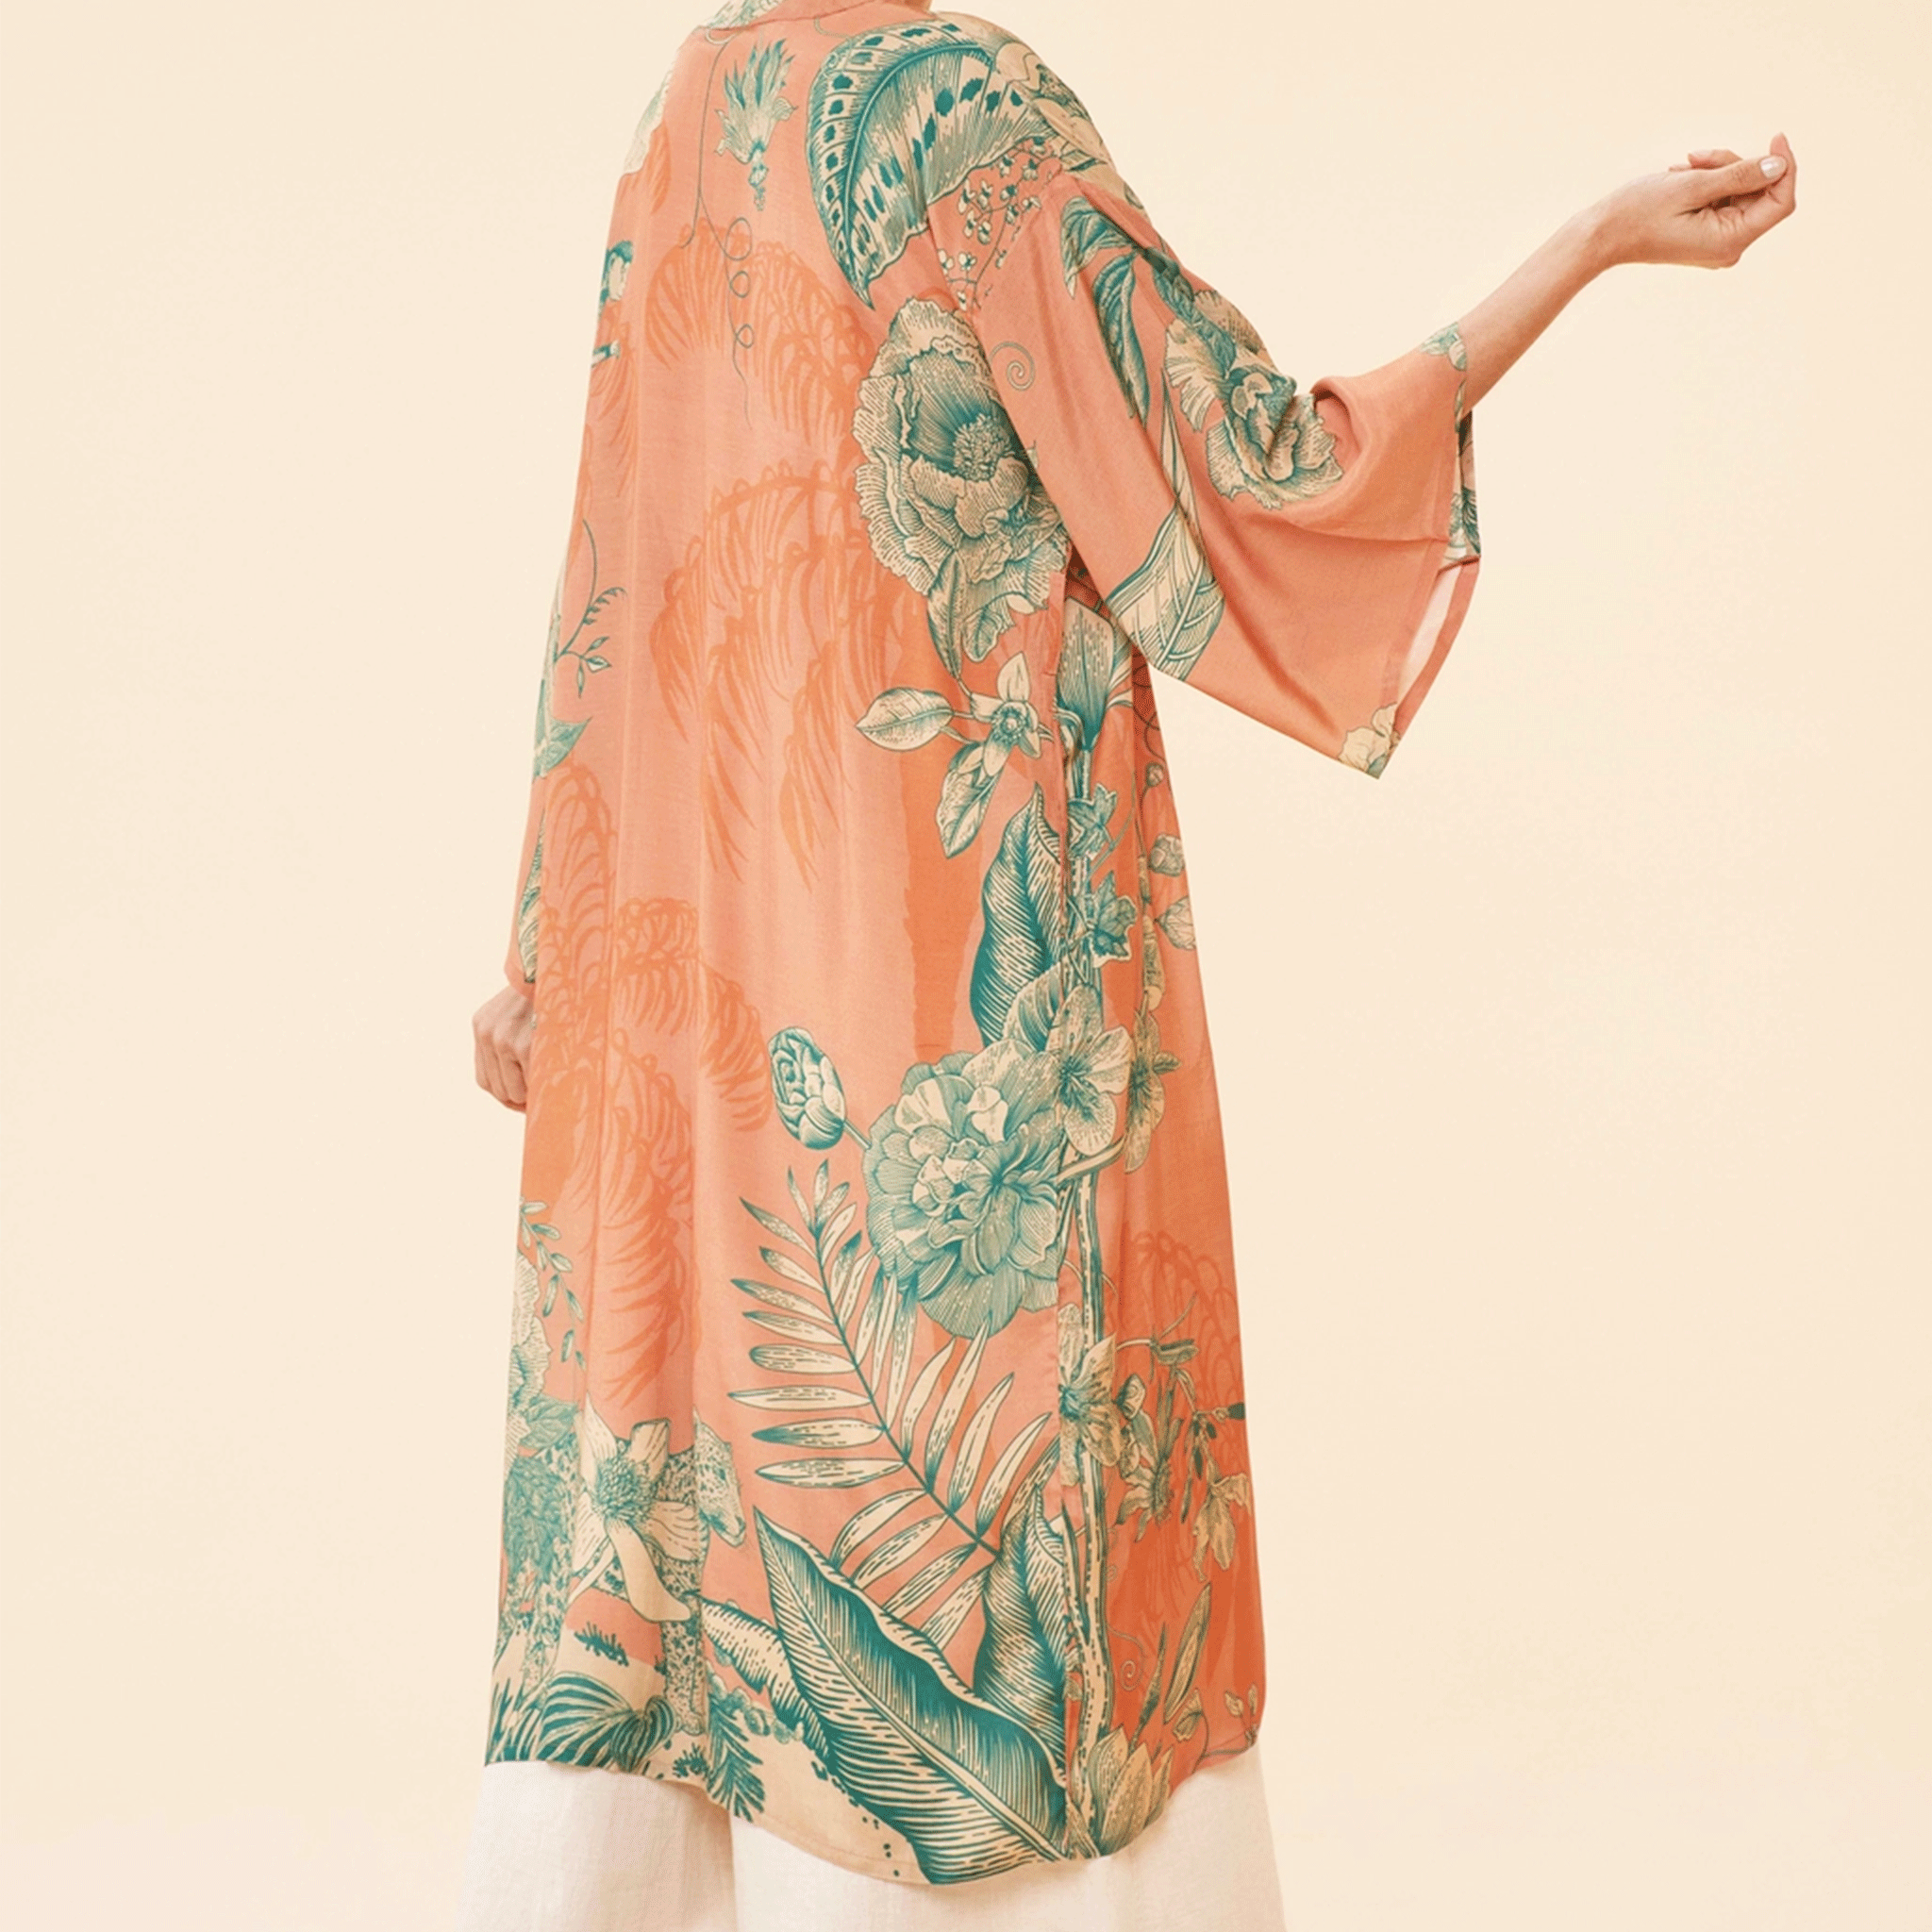 On a tan background is a model wearing an orange and teal kimono robe. 